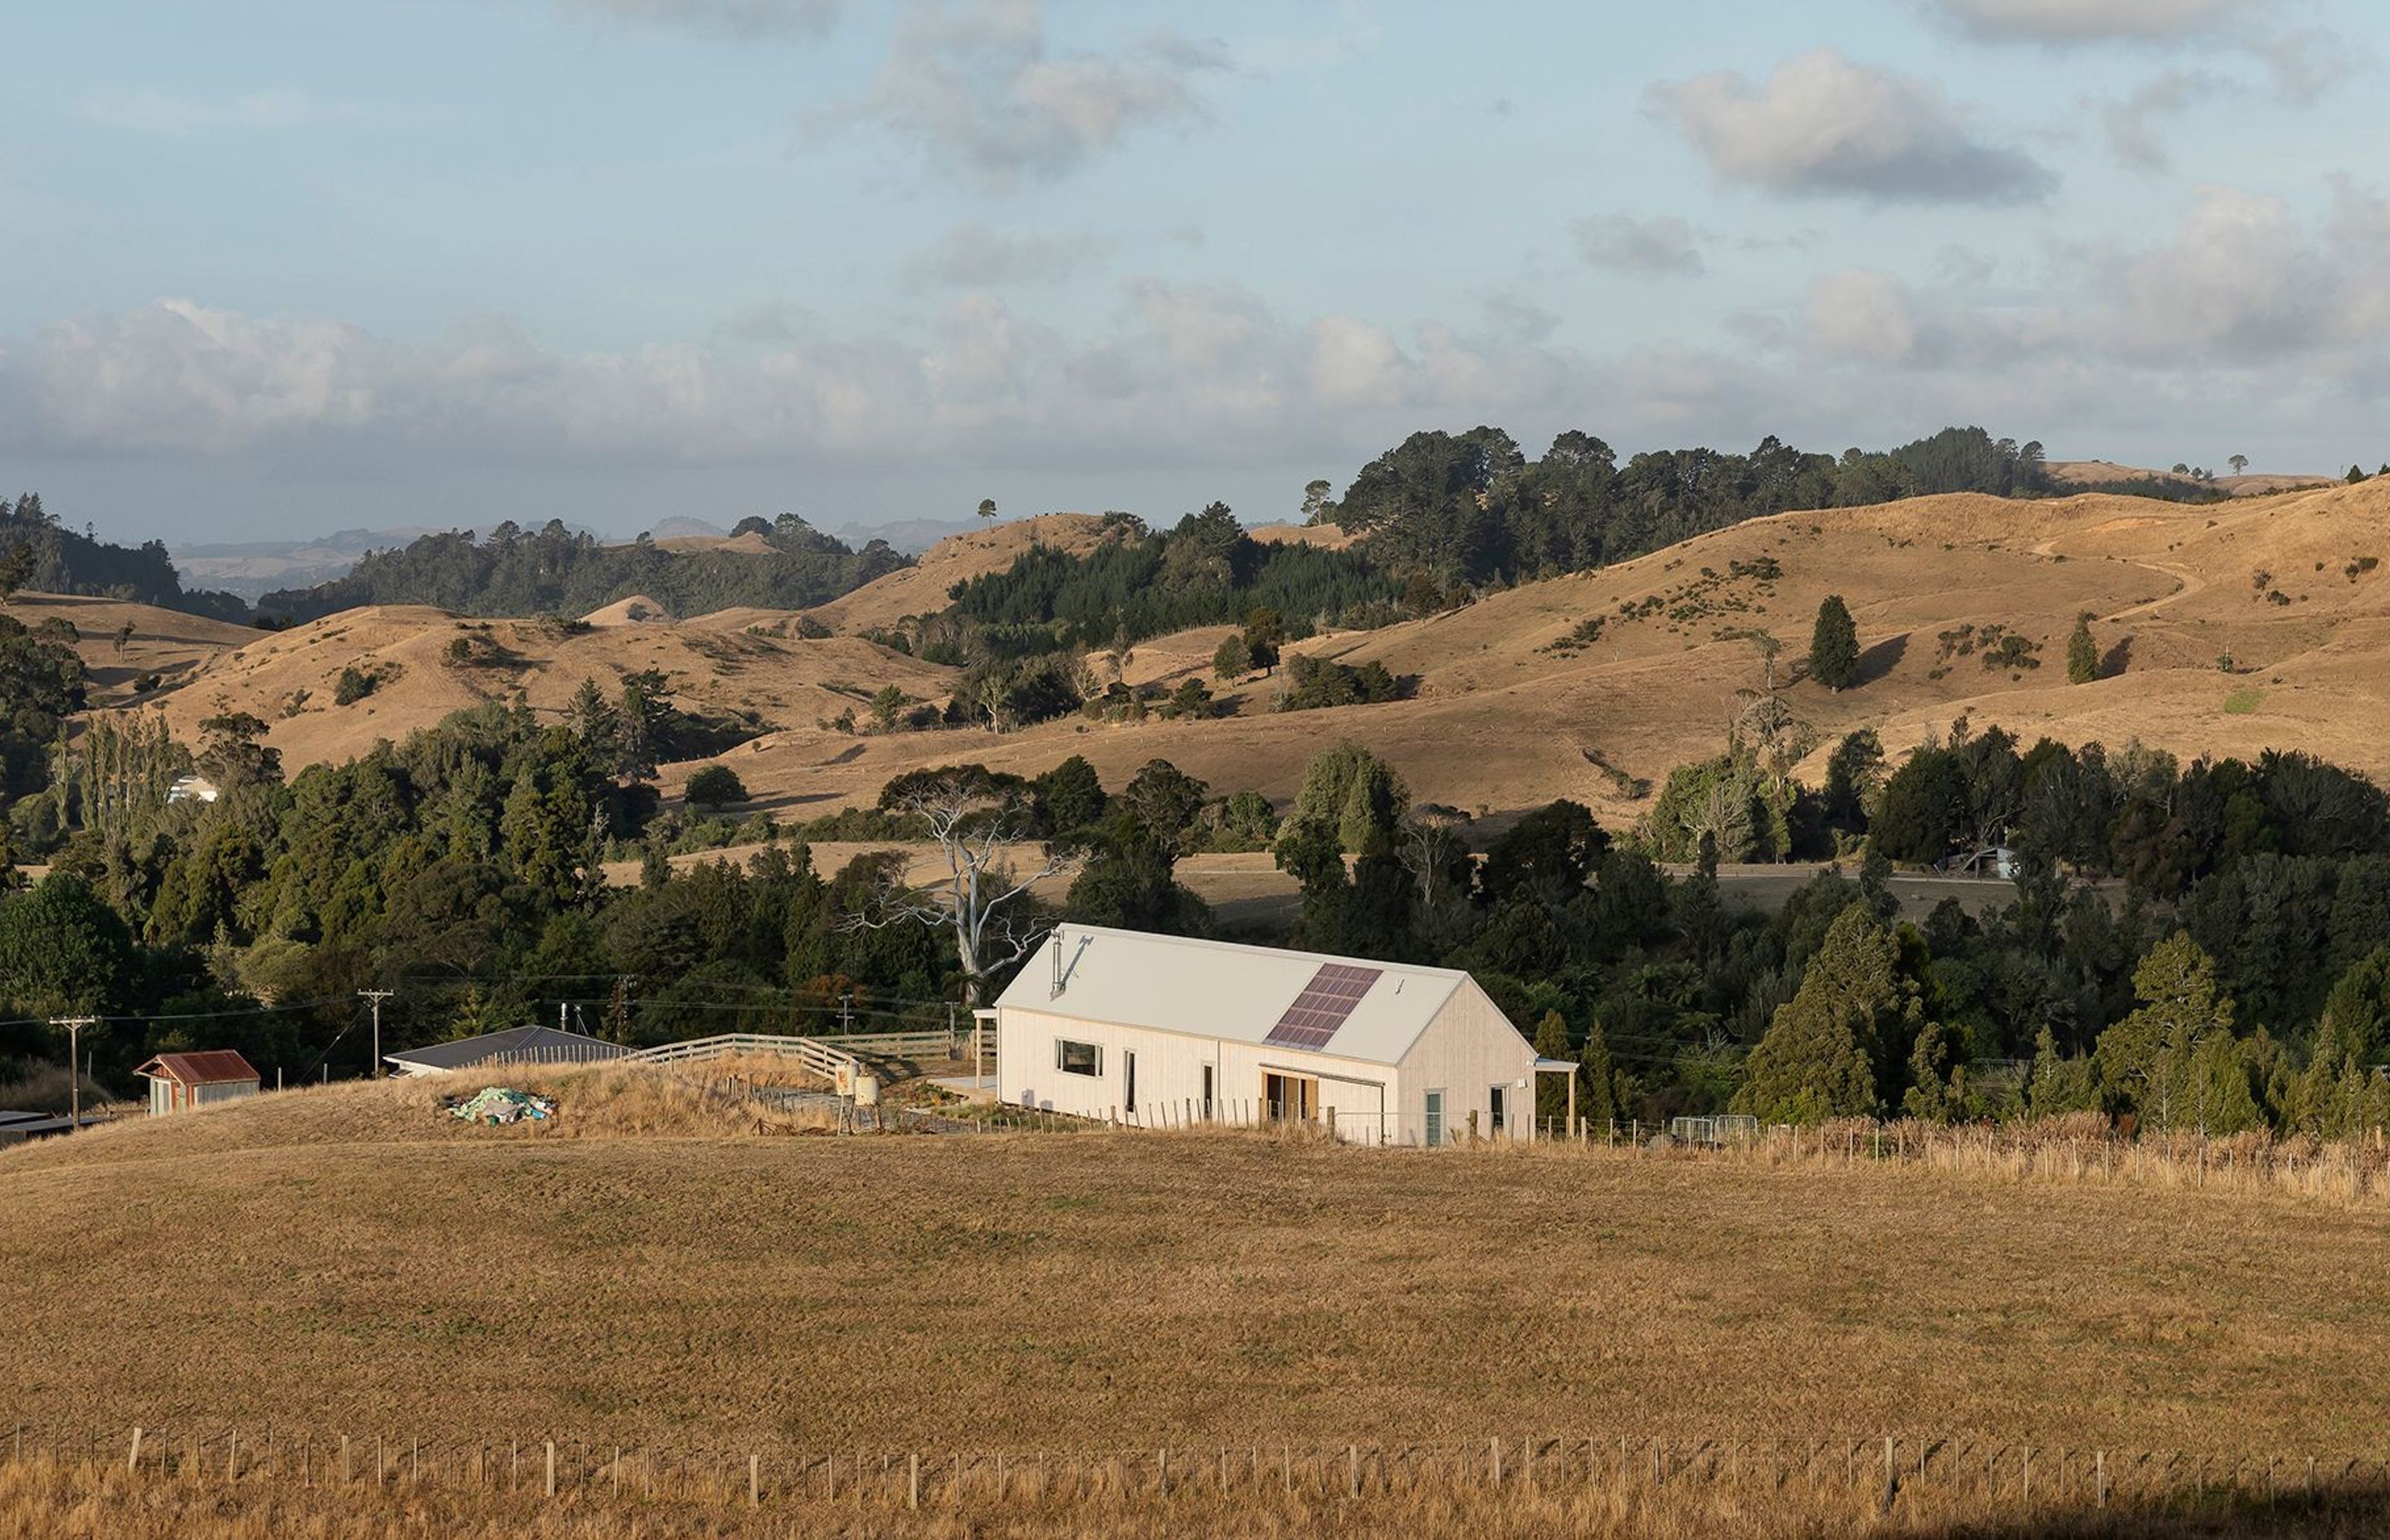 The east and north-facing elevations of Karangahake House, sitting within its farm setting. The owners plan to restore at least 11 acres of the property into native bush.